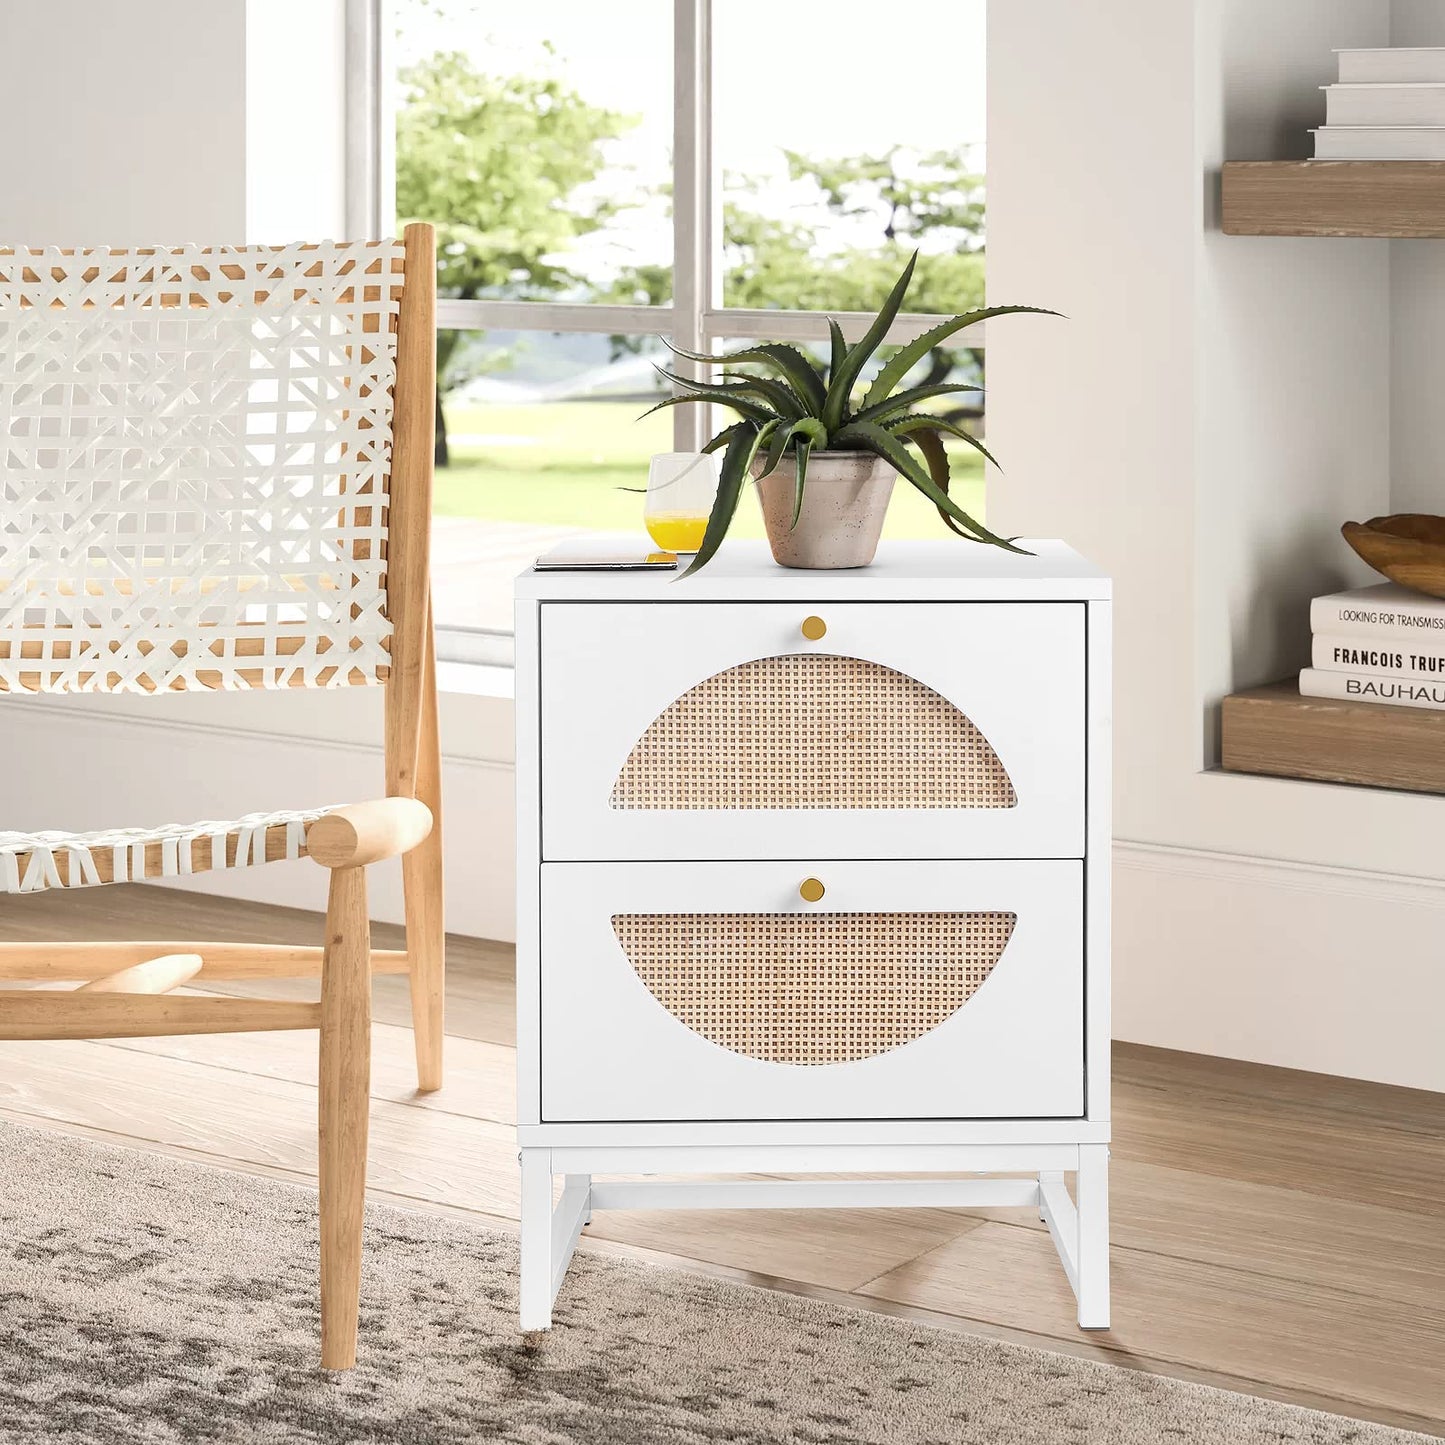 AWQM Rattan Nightstand Set of 2, End Side Table with 2 Rattan Drawers, Wood Square Bedside Table with Storage, Accent Sofa Table for Home Office Living Room Bedroom, White